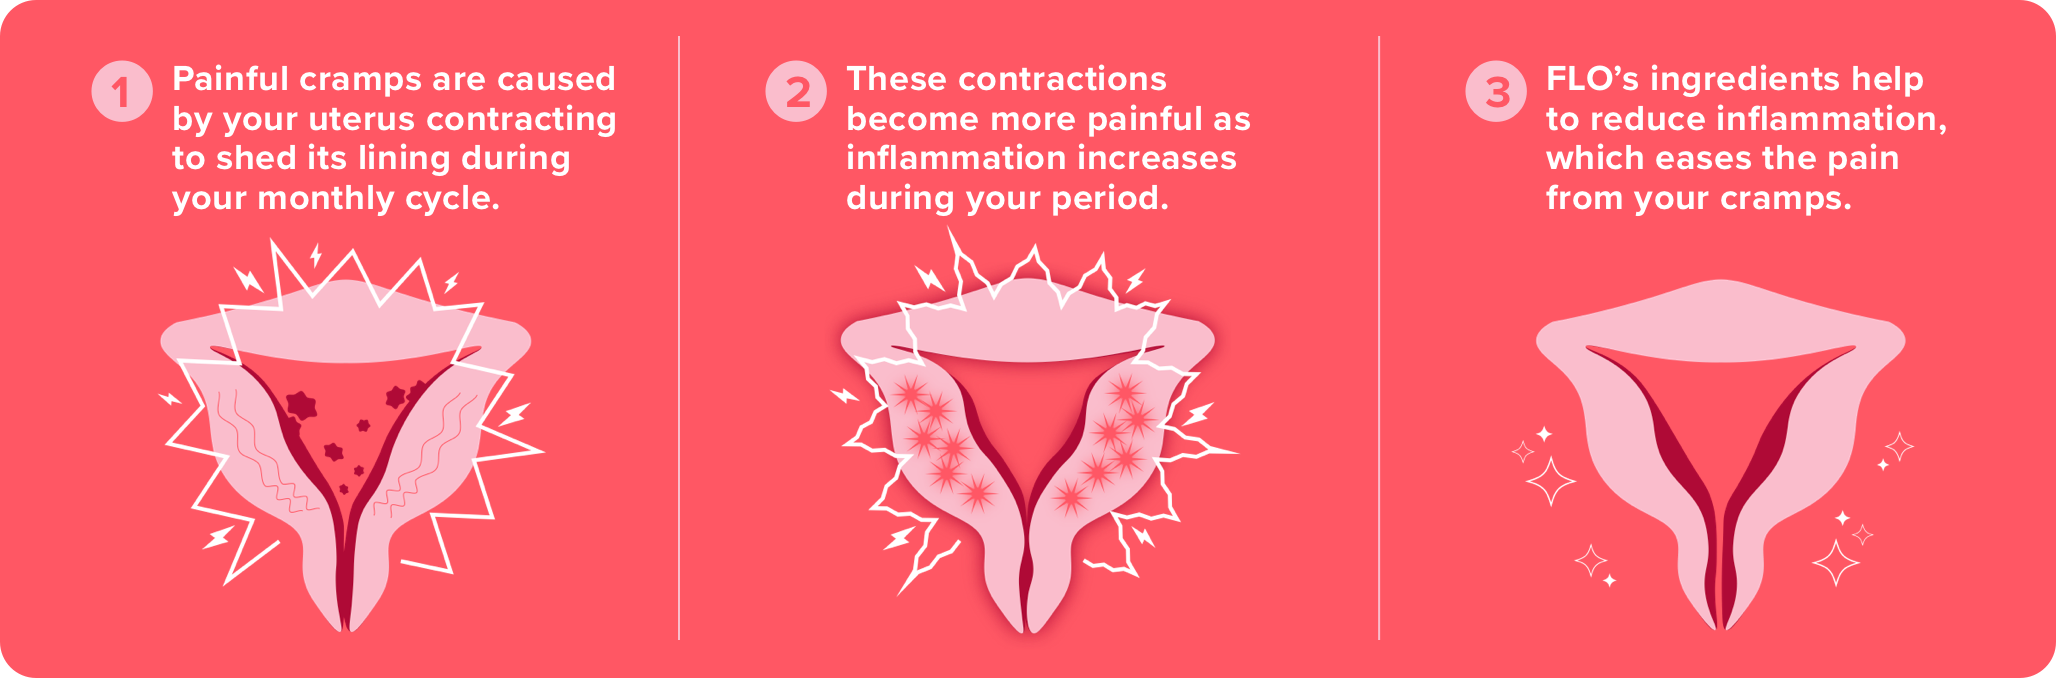 Painful cramps are caused by your uterus contracting to shed its lining during your monthly cycle. These contractions become more painful as inflammation increases during your period. FLO's ingredients help reduce inflammation, which eases pain from cramps.